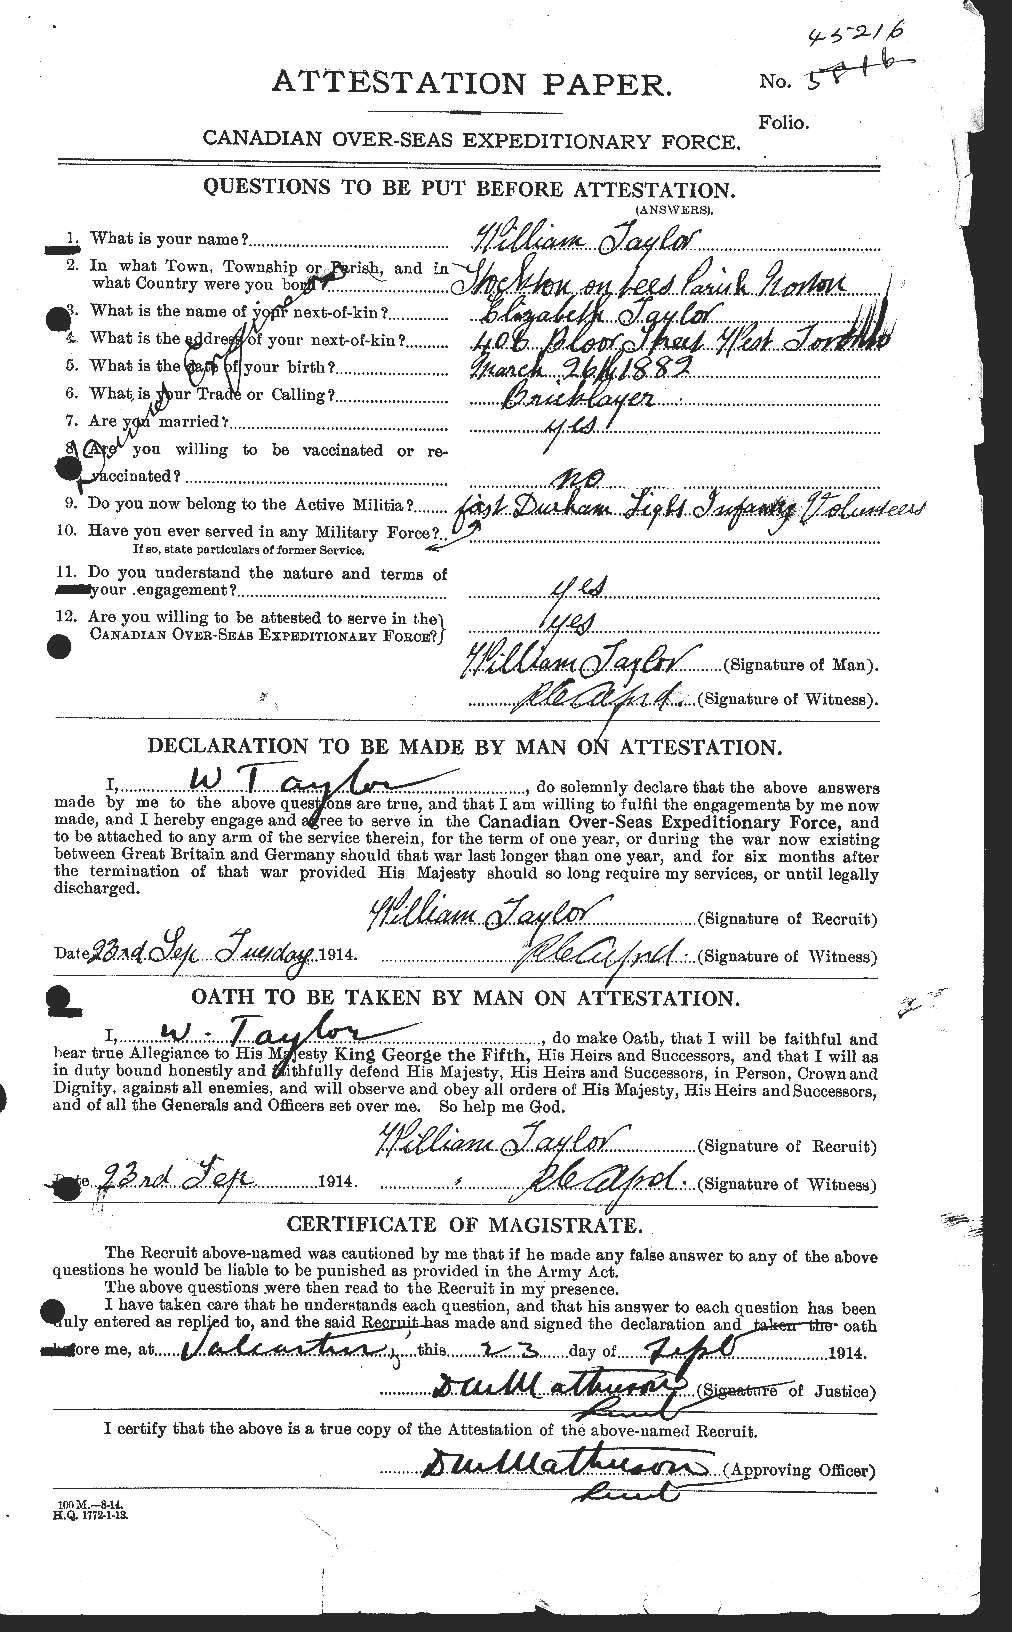 Personnel Records of the First World War - CEF 628146a